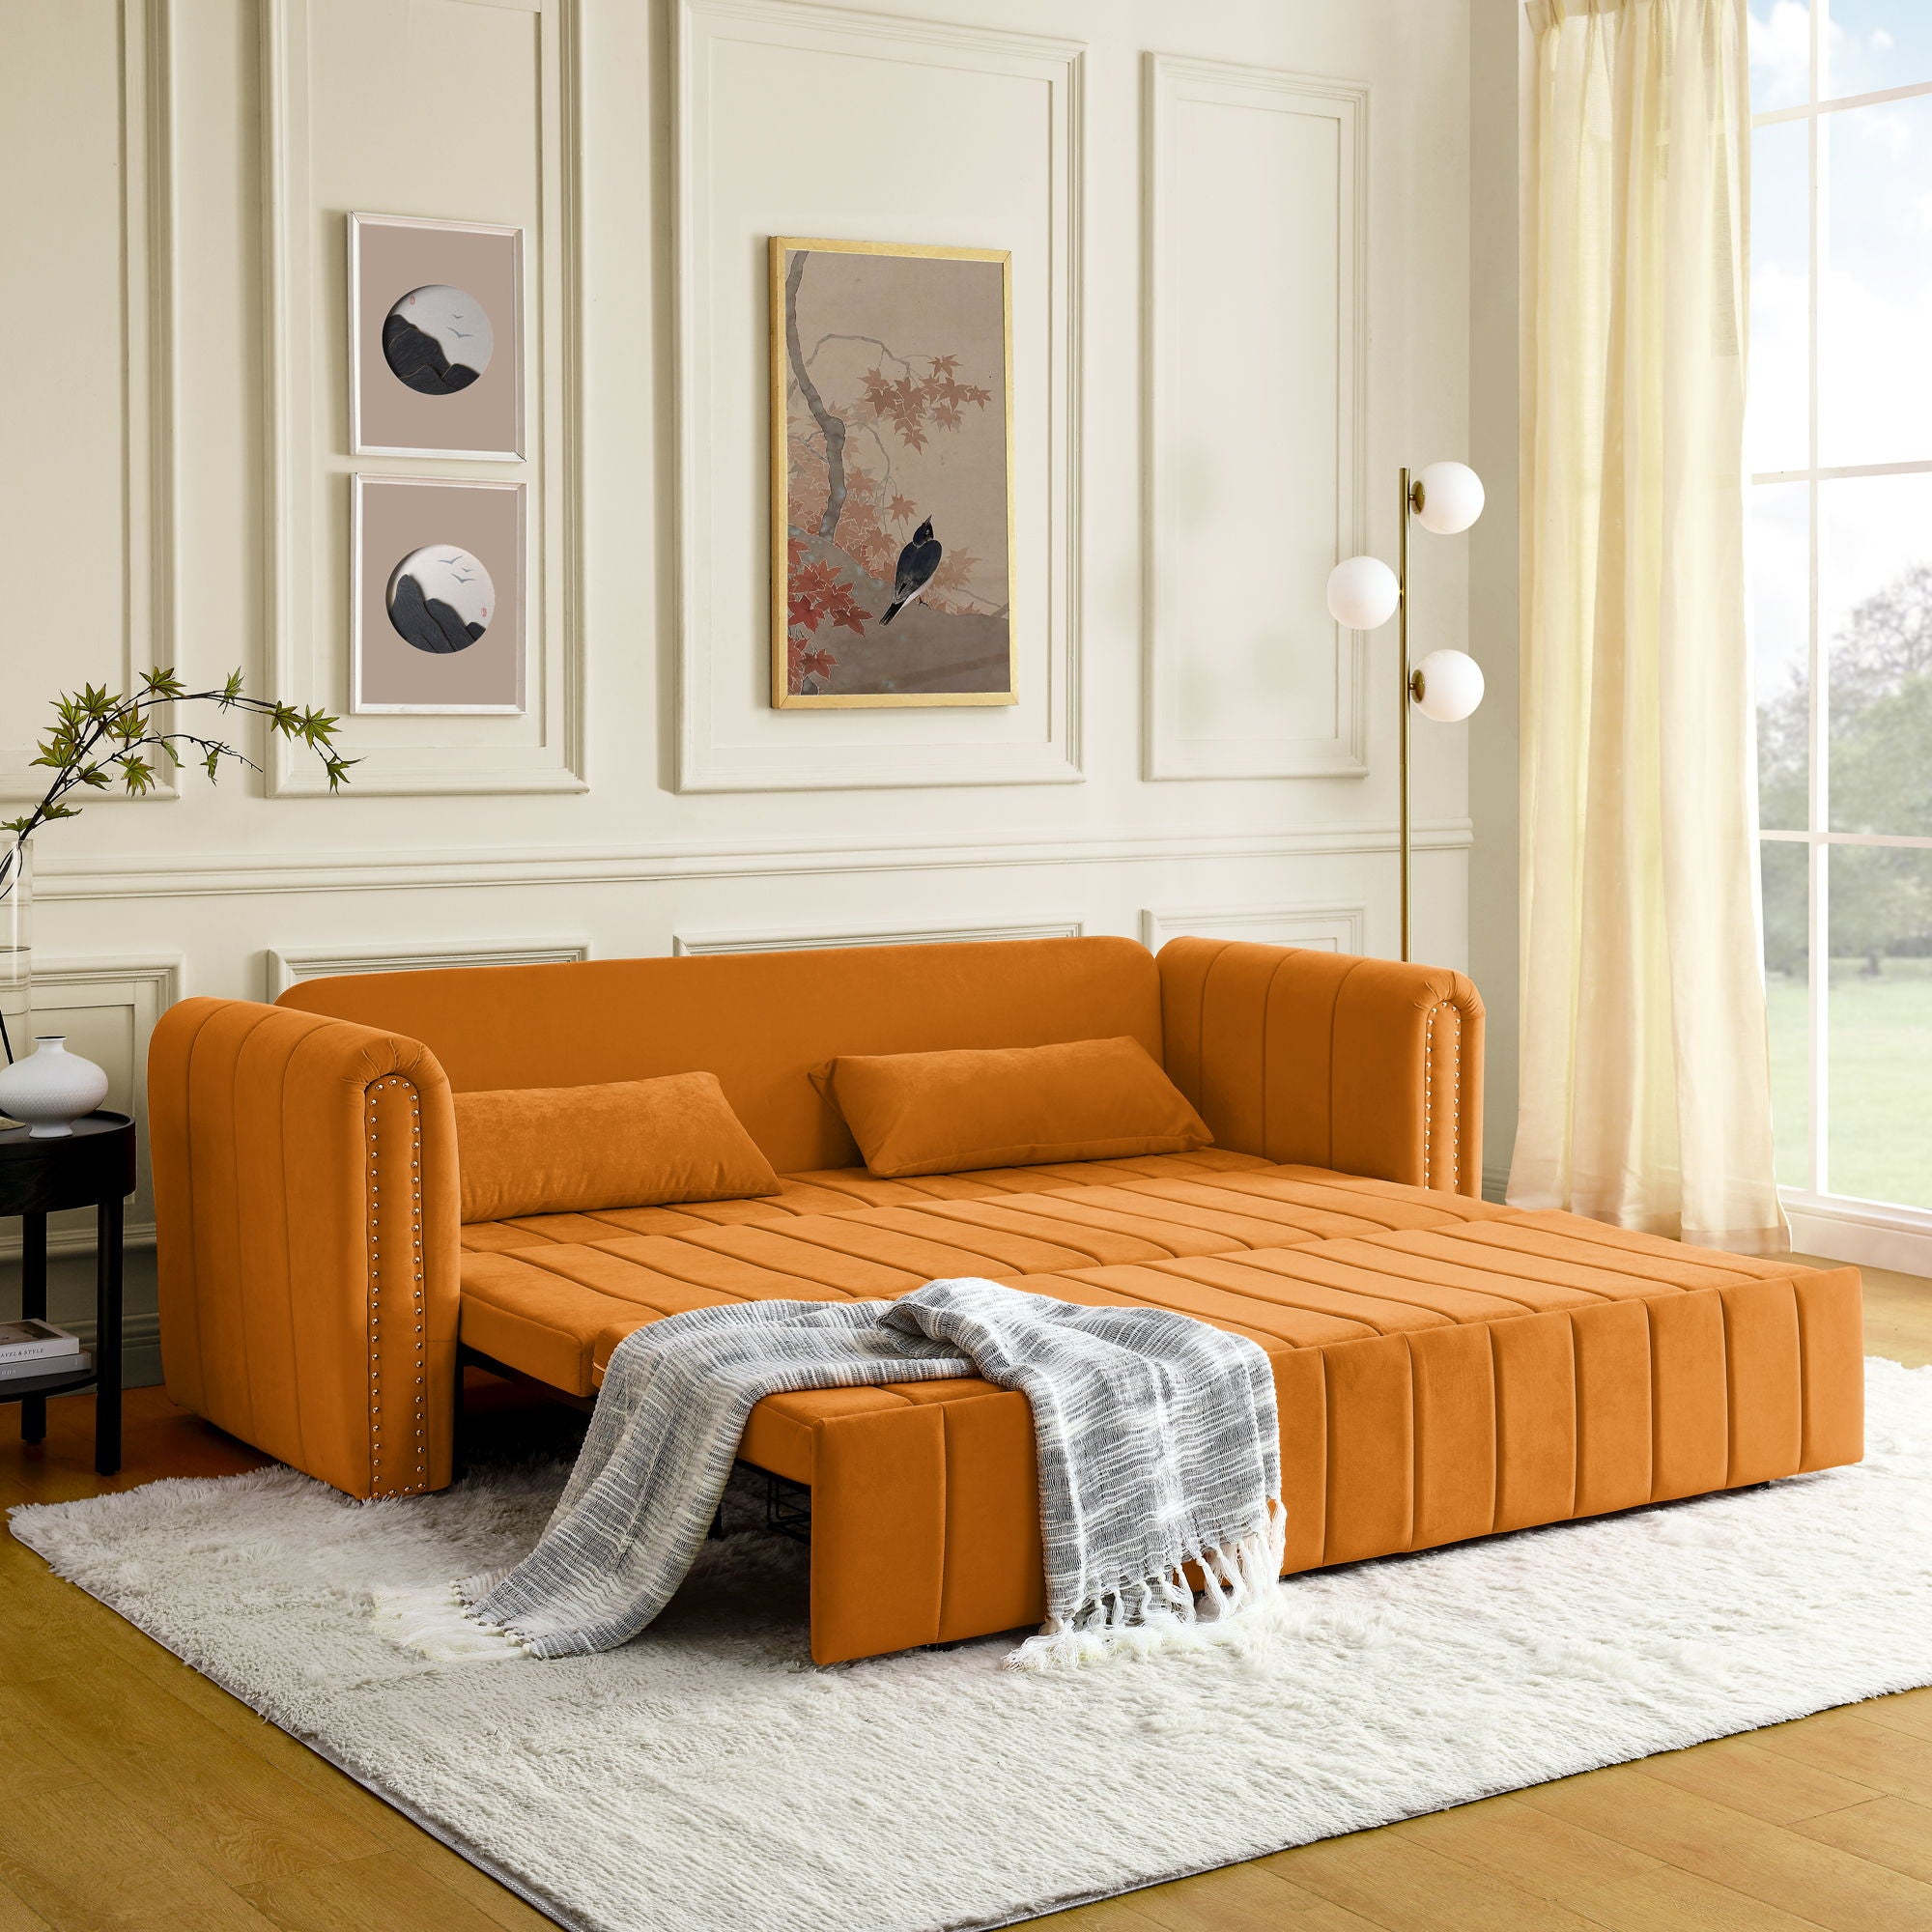 3 In 1 Pull-Out Bed Sleeper, Modern Upholstered 3 Seats Lounge Sofa & Couches With Rolled Arms Decorated With Copper Nails, Convertible Futon 3 Seats Sofabed With Two Drawers And Two Pillows